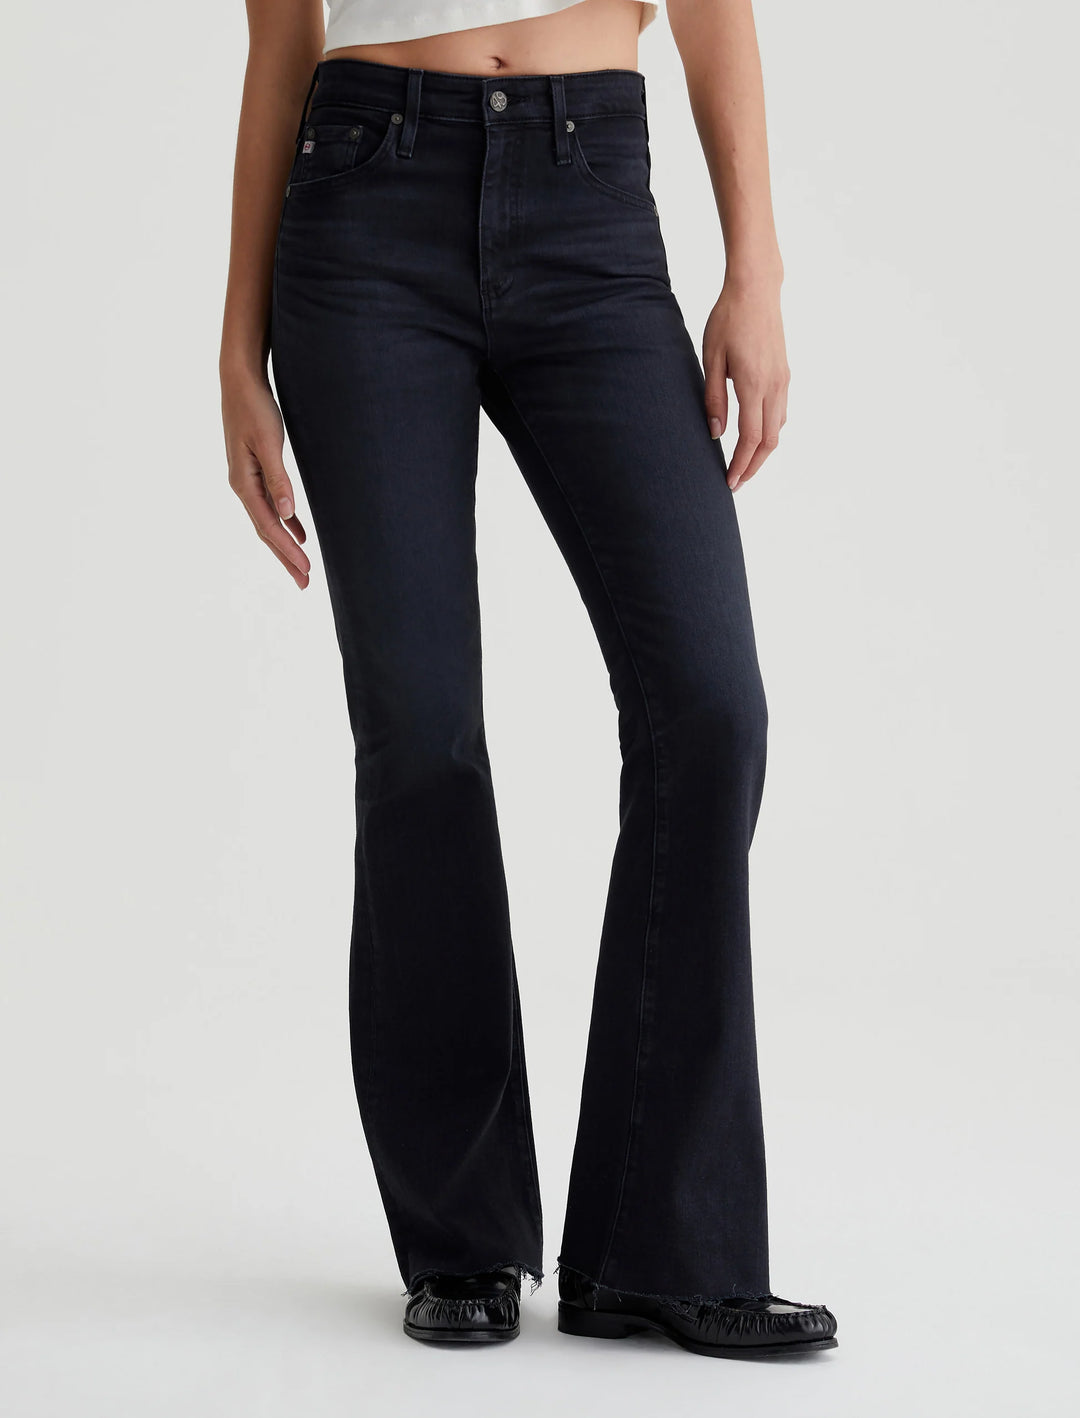 AG Jeans Farrah Boot High Rise Jeans- 4 Years Discord